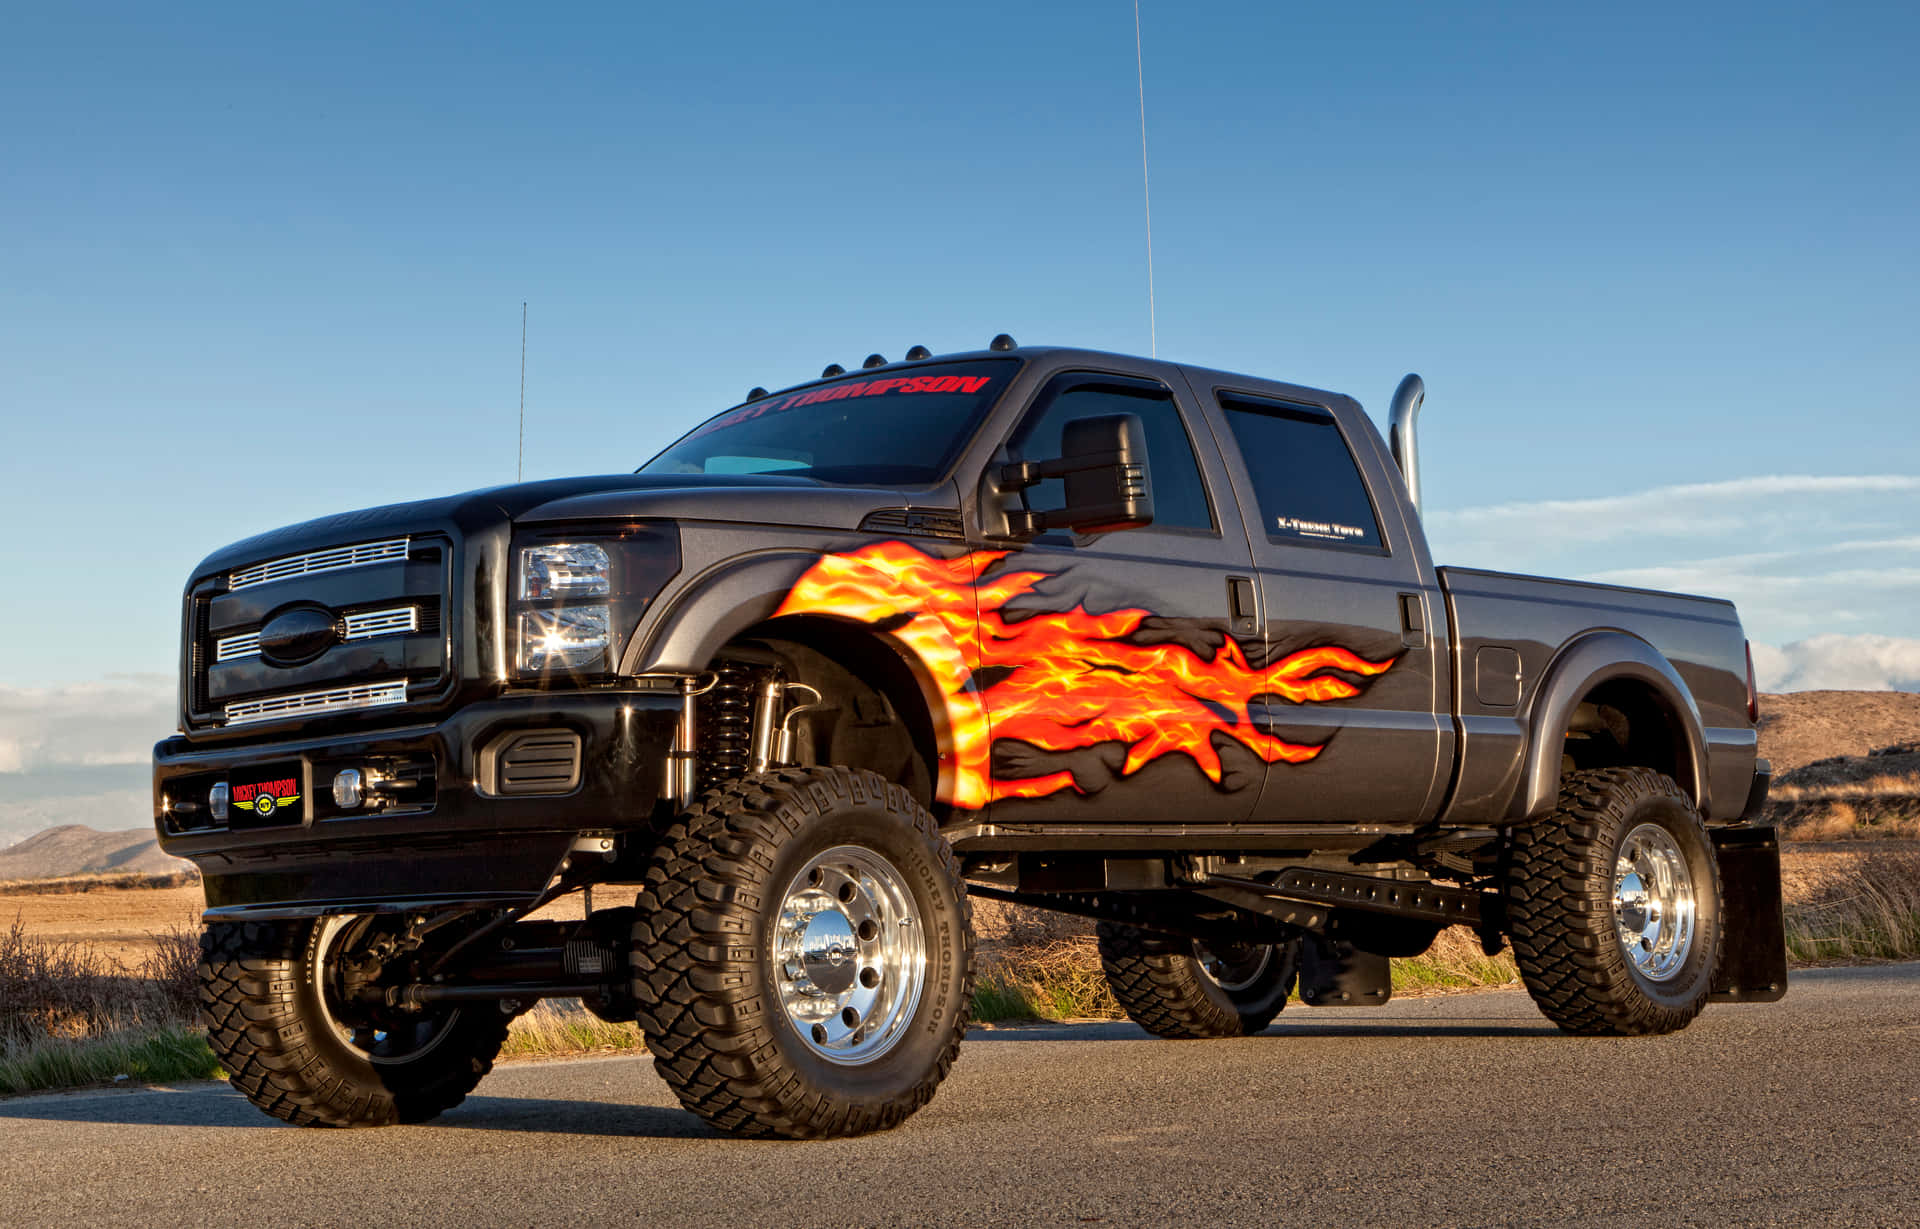 A Black Truck With Flames On It Wallpaper